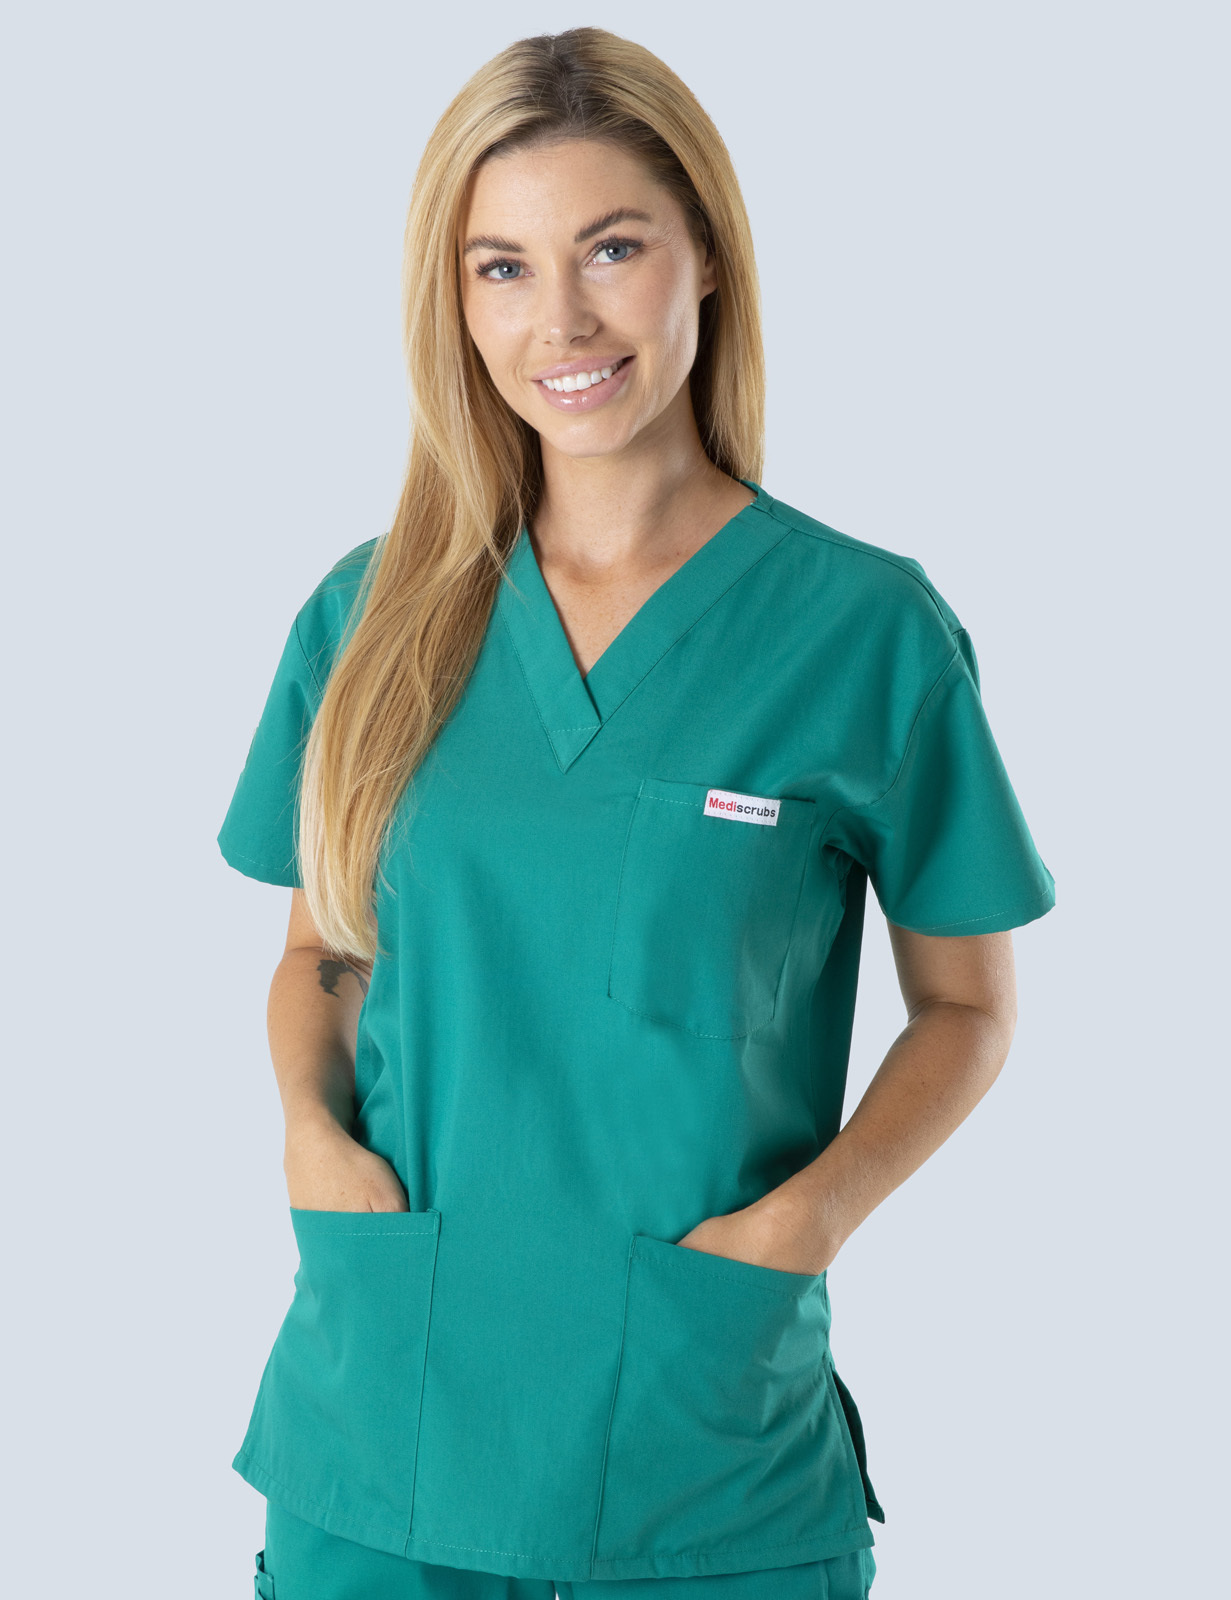 Canberra Hospital - ED Doctor (4 Pocket Scrub Top and Cargo Pants in Hunter incl Logos)